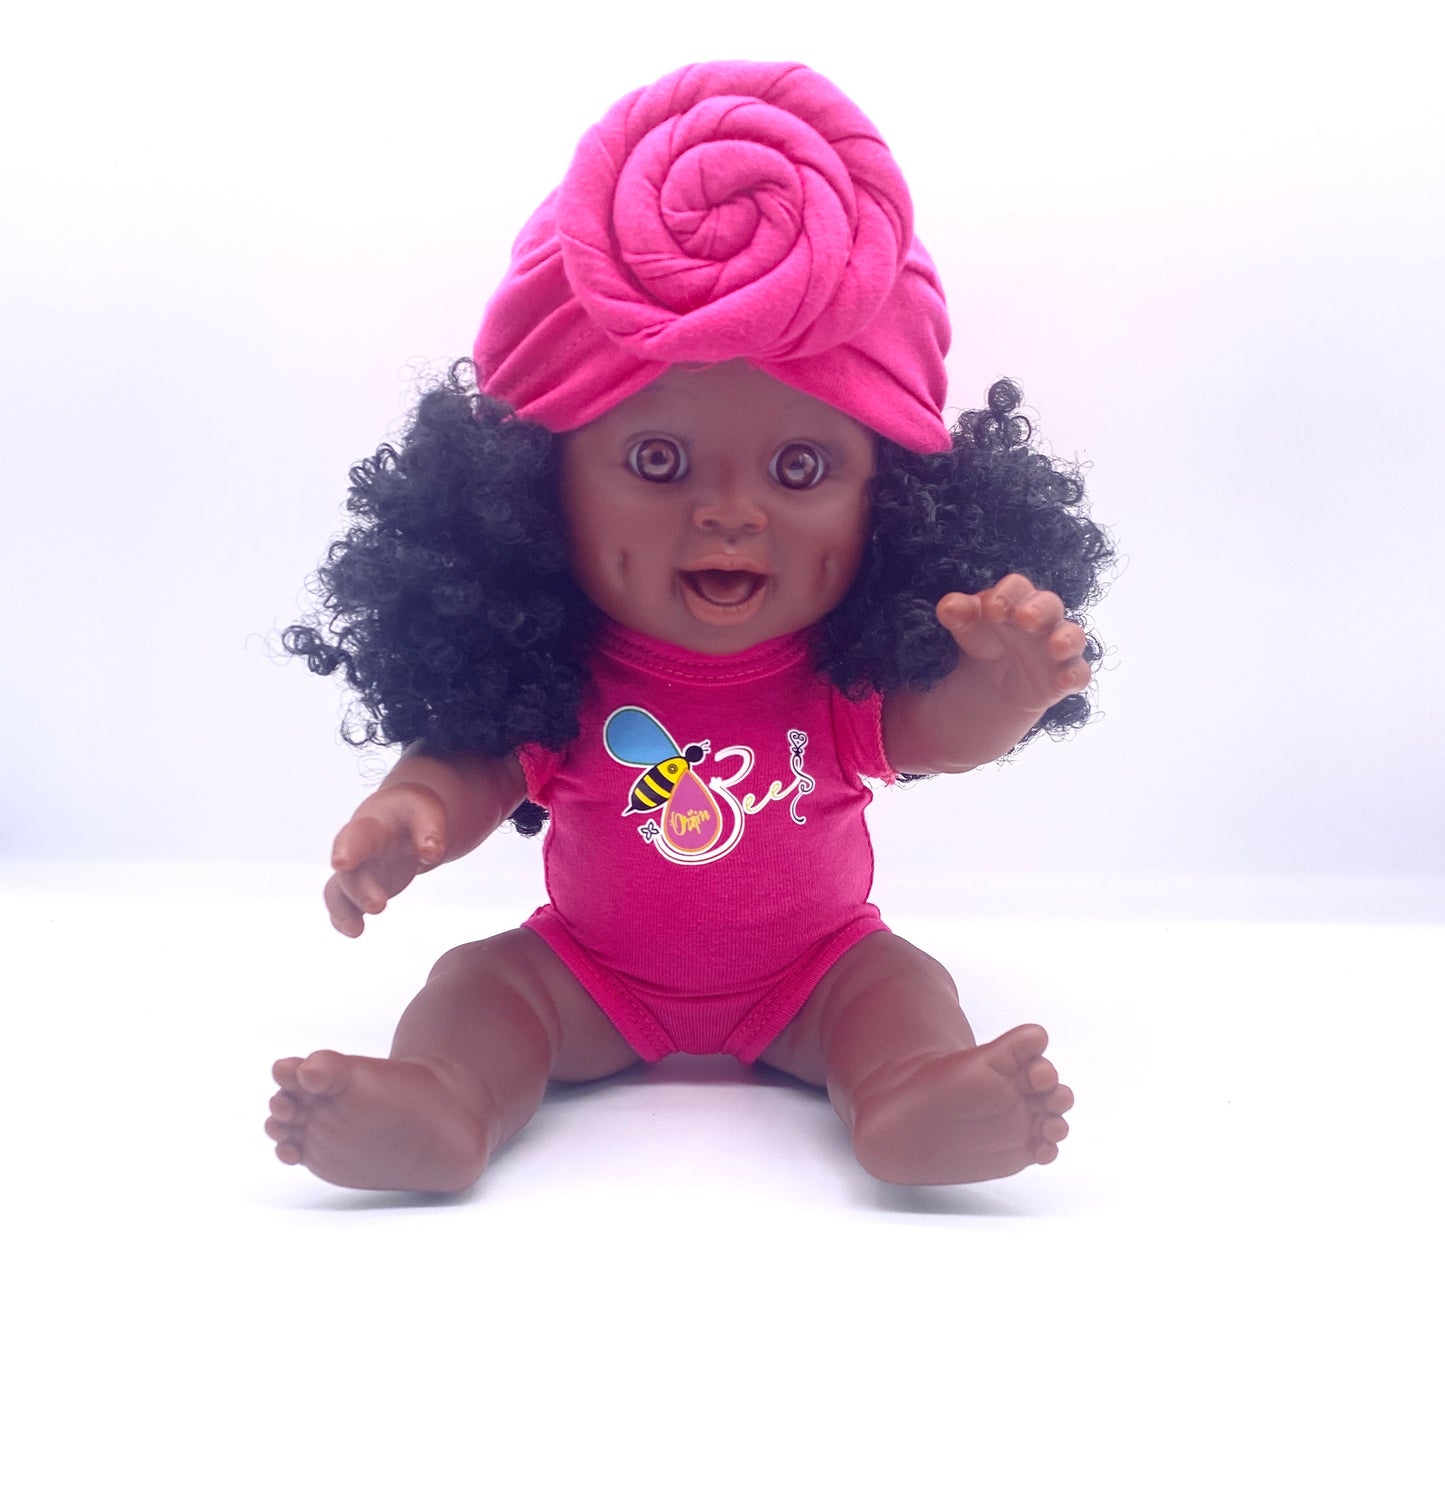 Romper & Turban Headband Set for Baby Bee Doll (doll sold separately) | Orijin Bees